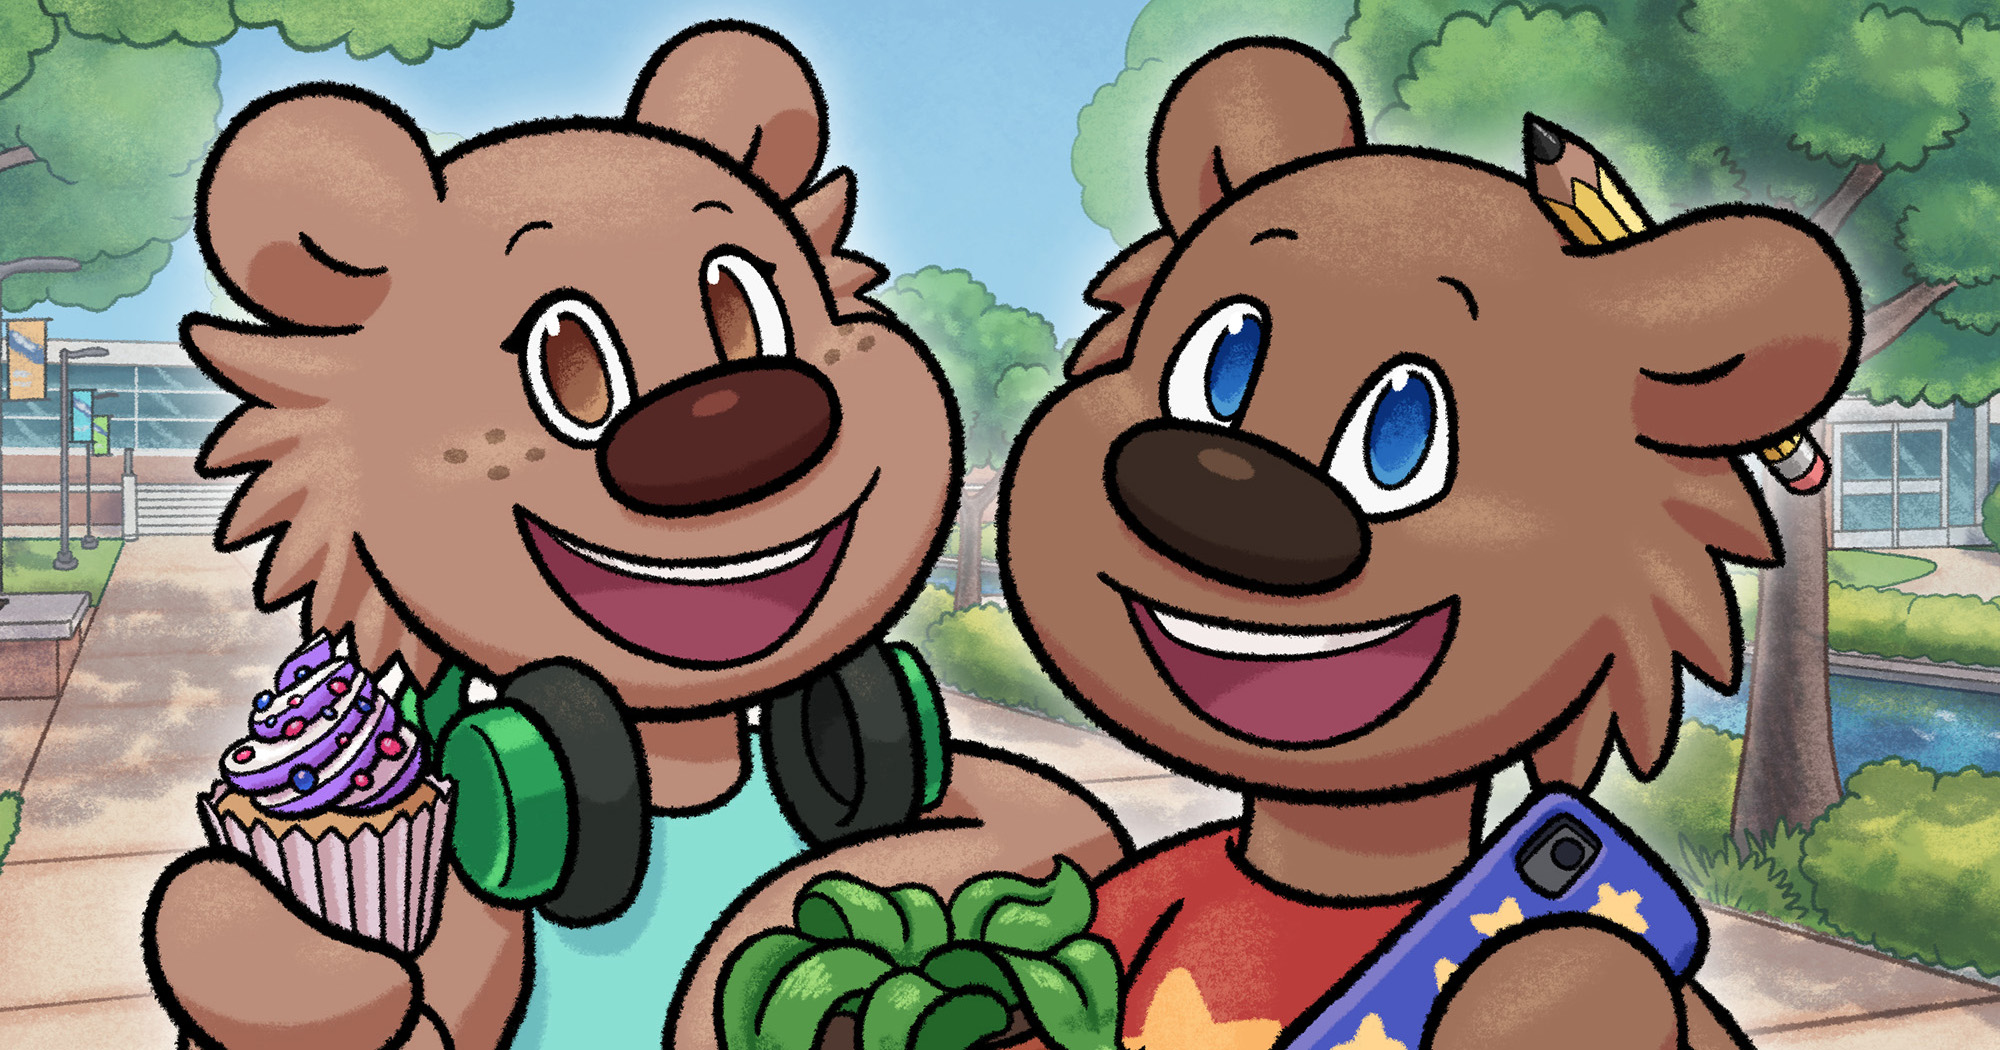 The cover of "Blaze Goes to Camp," featuring an illustration of two cartoon bears.